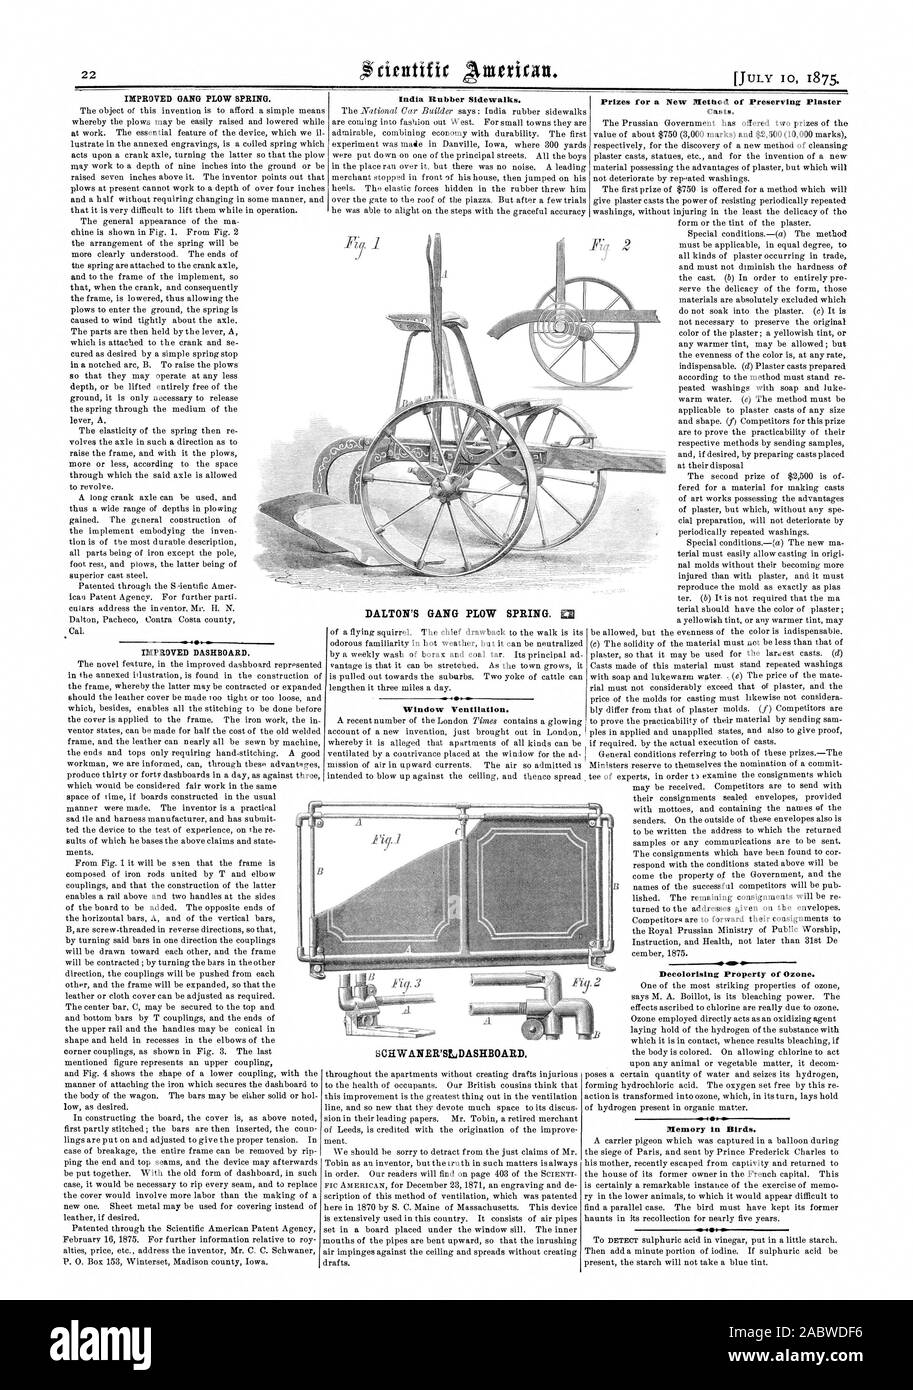 India Rubber Sidewalks. IMPROVED GANG PLOW SPRING IMPROVED DASHBOARD. Prizes for a New Method of Preserving Plaster Casts. Becolorising Property of Ozone. Memory in Birds. DALTON'S GANG PLOW SPRING. EE Window Ventilation. SCHWANER'SLDASHBOARD., scientific american, 1875-07-10 Stock Photo